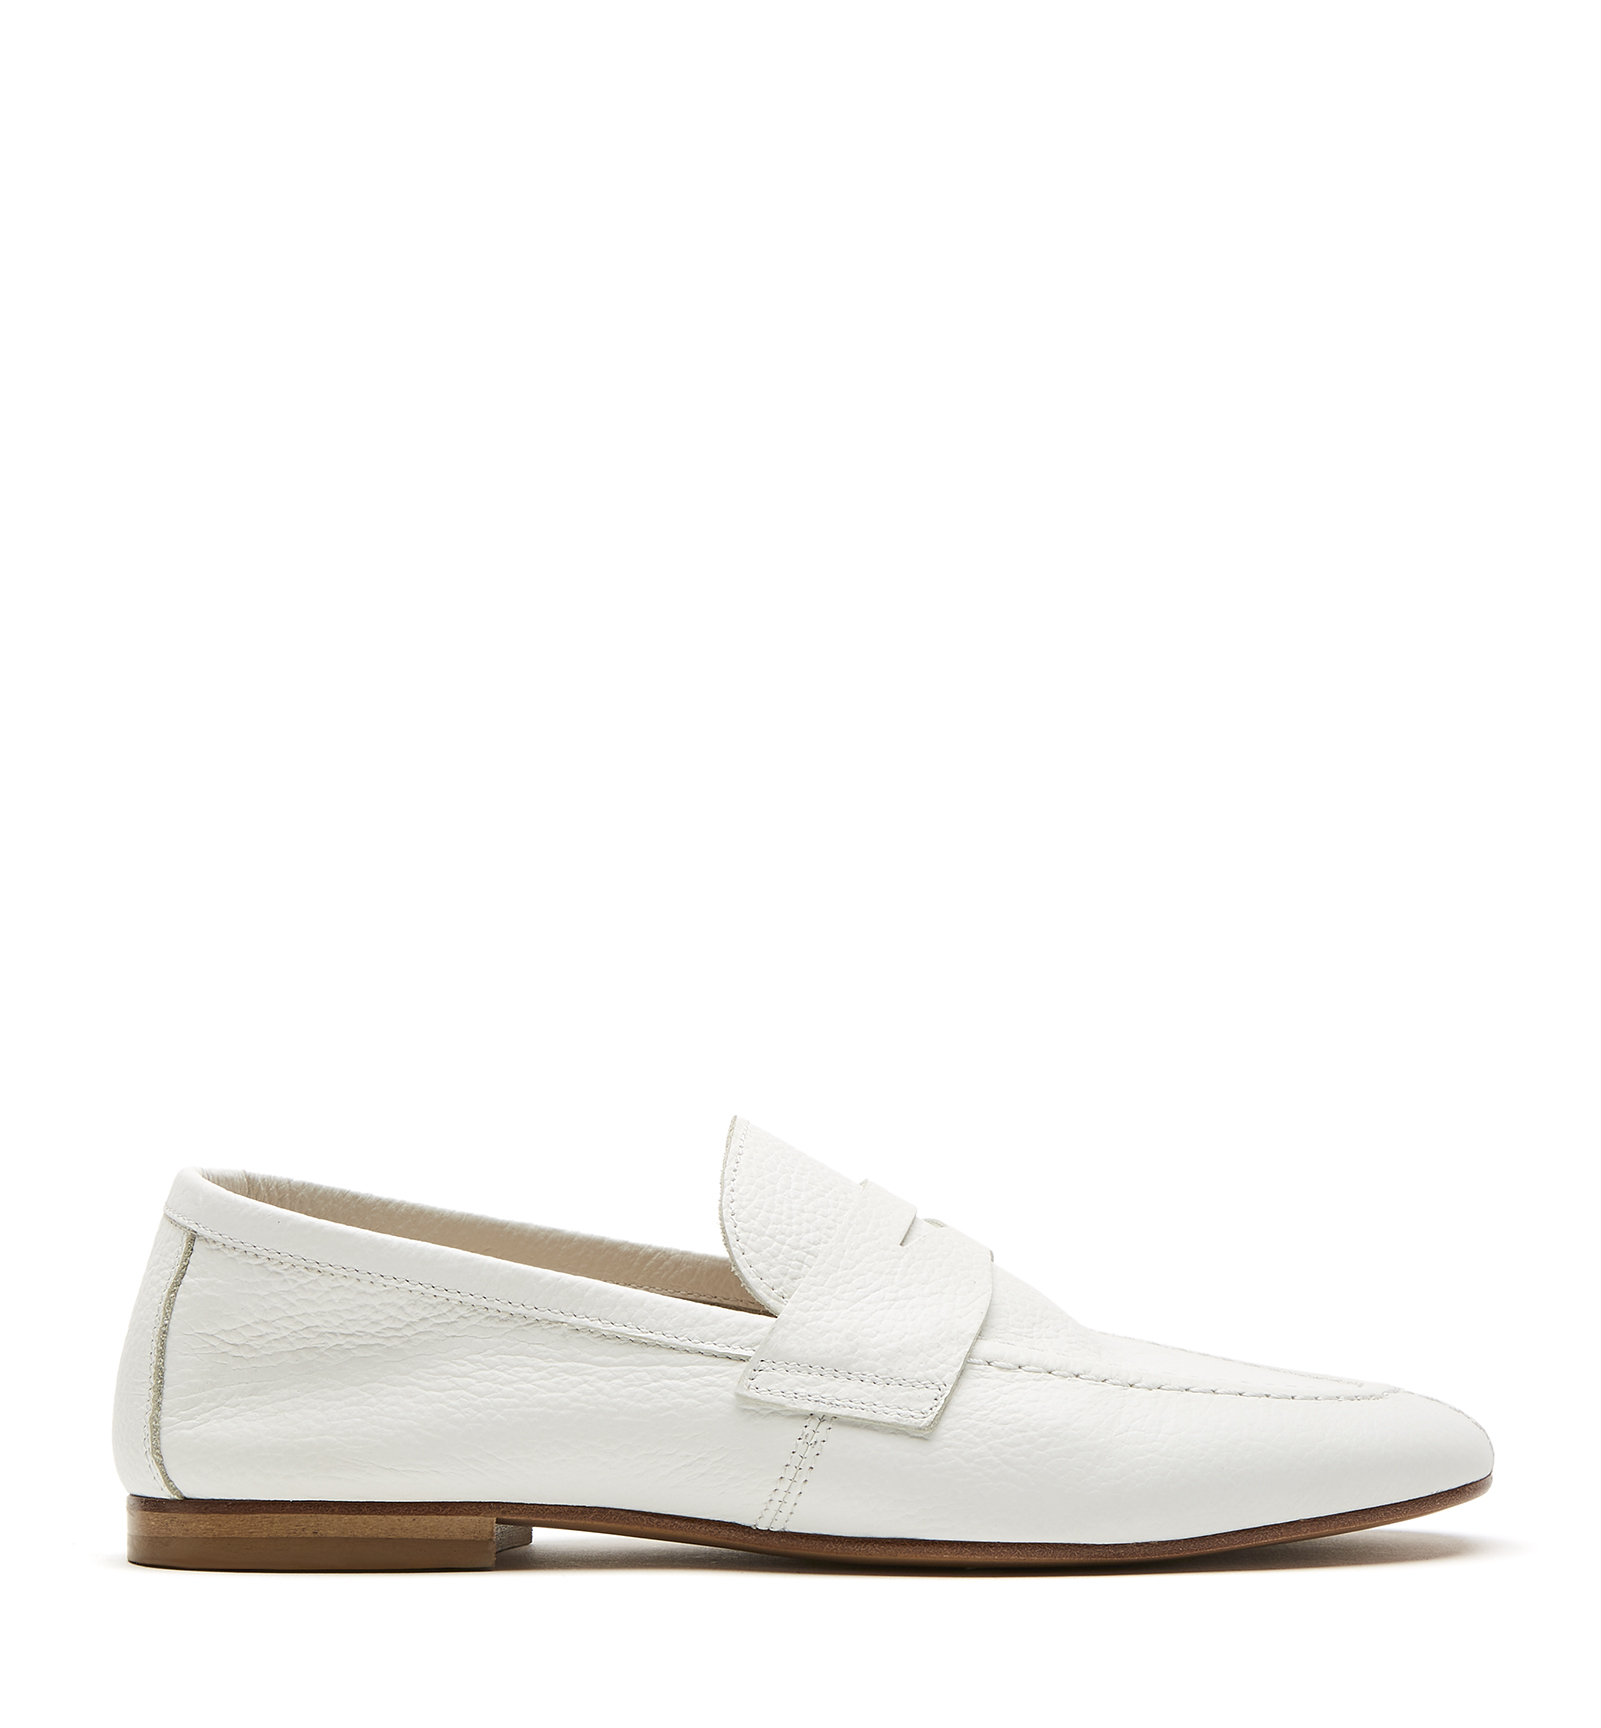 La Canadienne Baz Leather Loafer In White